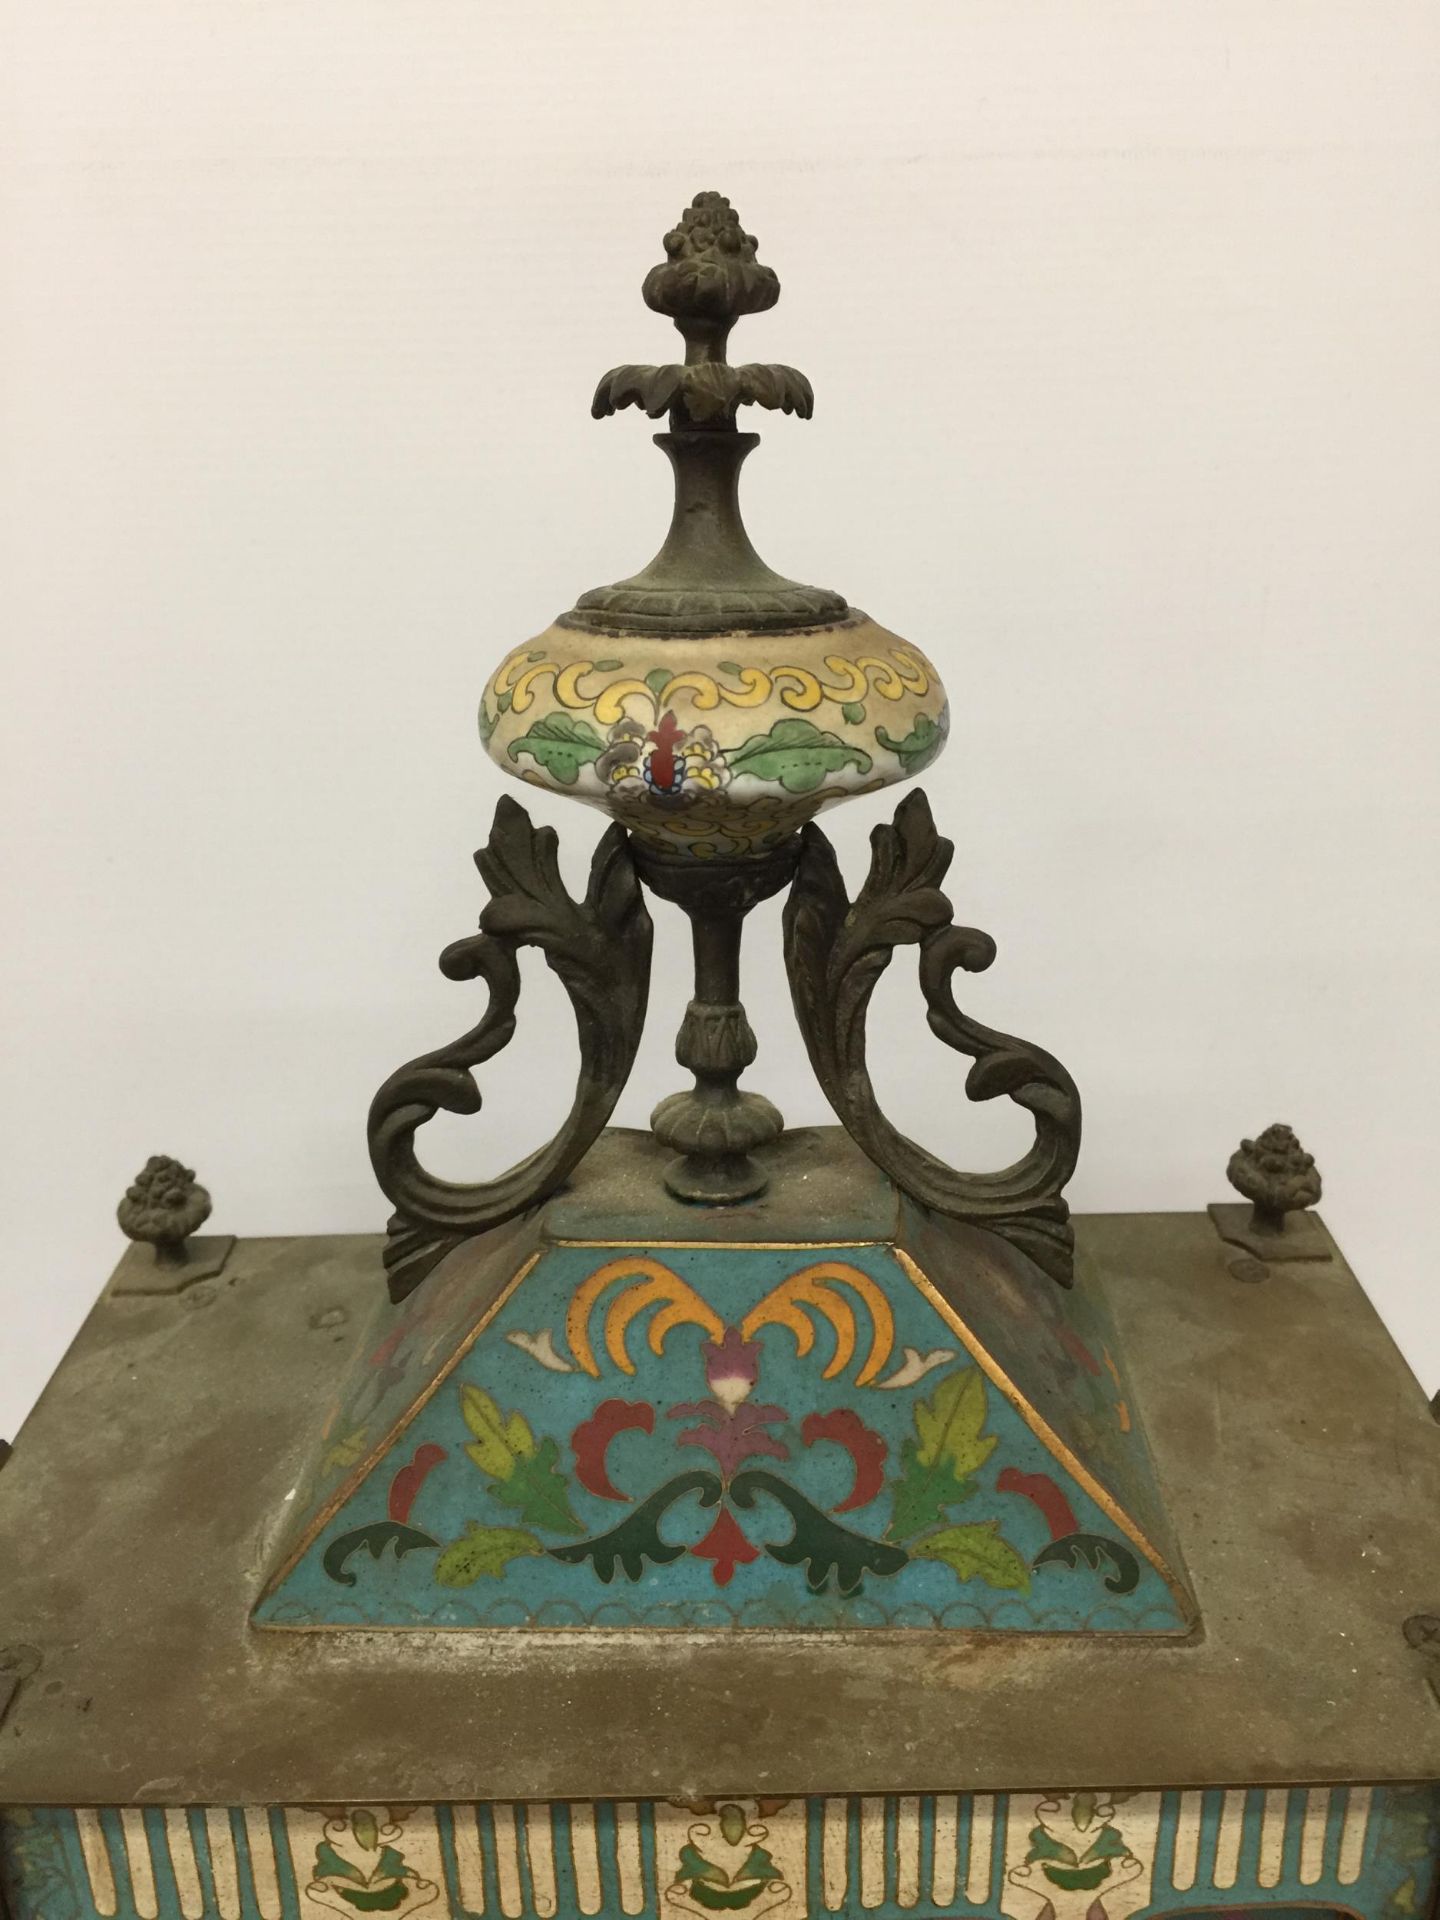 AN ART NOUVEAU CLOISONNE AND BRASS CHIMING MANTLE CLOCK WITH RAM HEAD SIDE DESIGN - Image 3 of 8